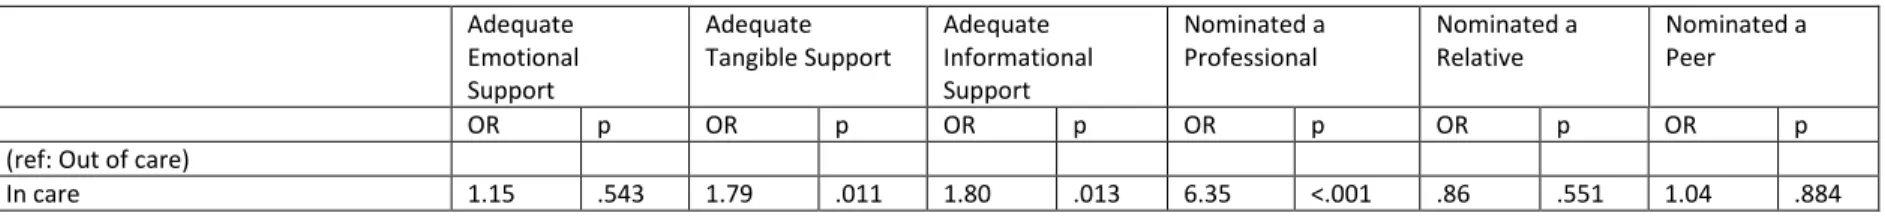 Table 6. Results from logistic regression analyses of wave 2 social support on care status at wave 2 (n=611, covariates not shown, weighted)  Adequate  Emotional  Support  Adequate  Tangible Support  Adequate  Informational Support  Nominated a Professiona